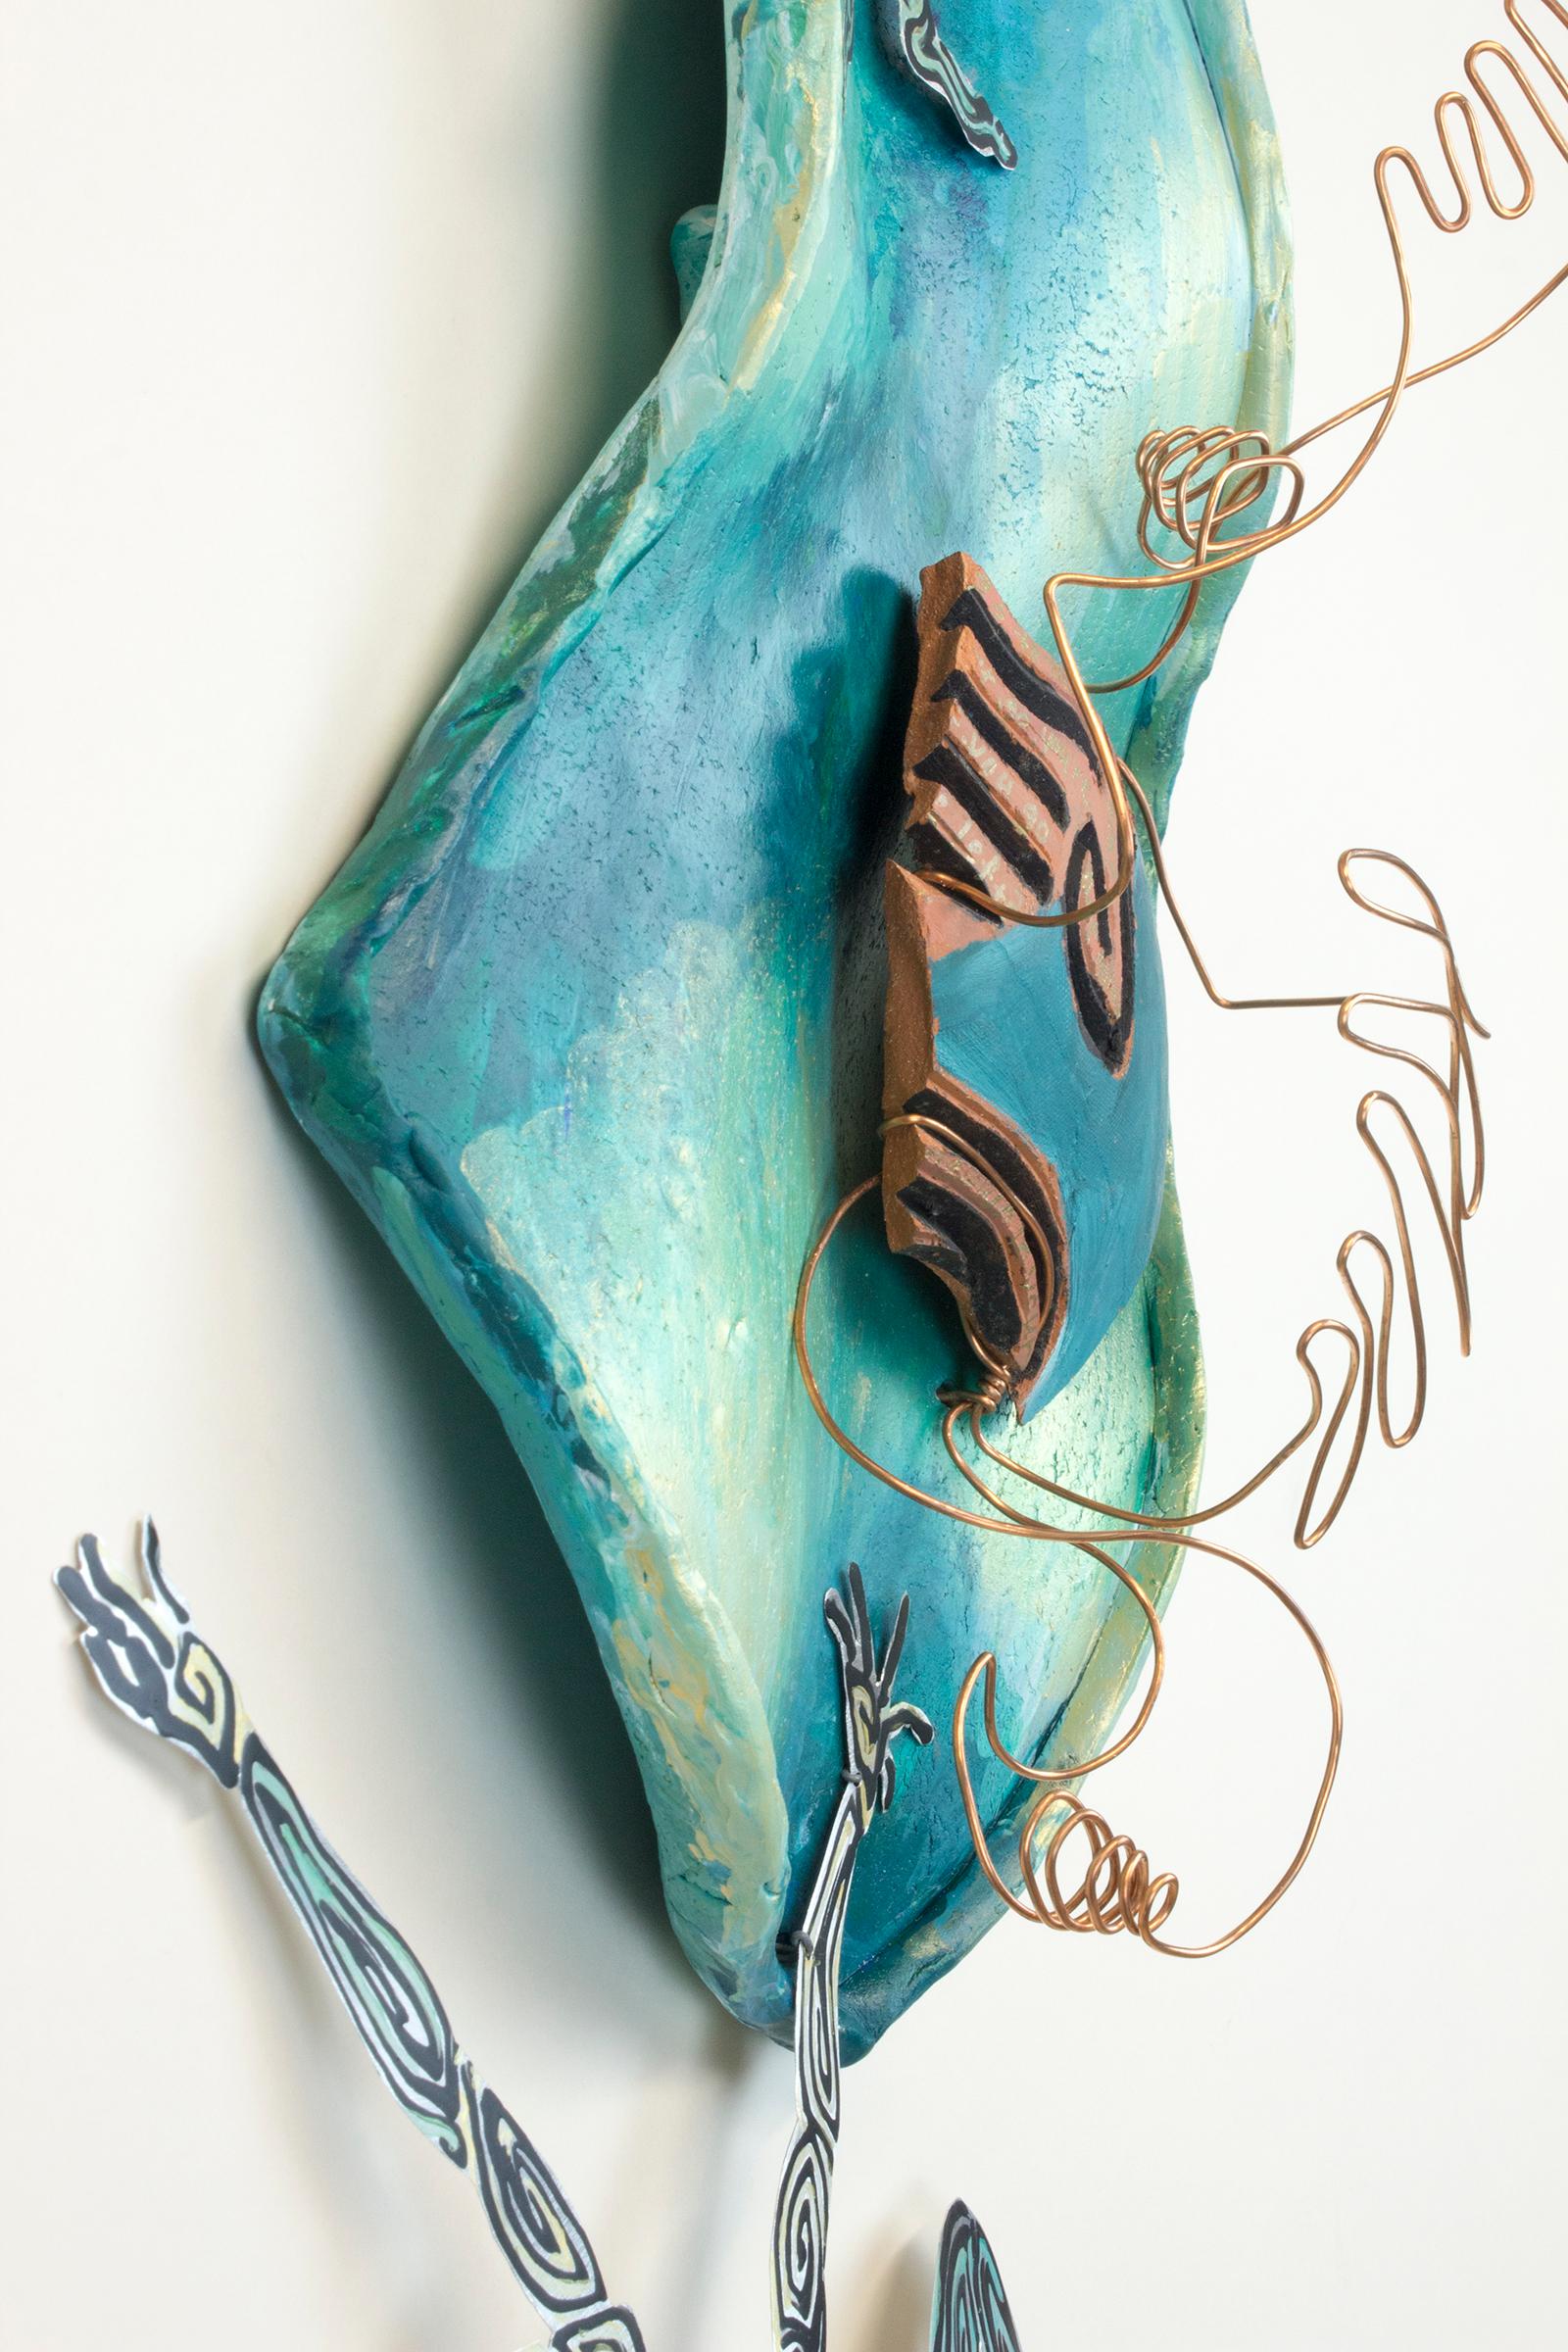 Virginia Mahoney’s “Unresolved Contradiction” is a 25 x 13 x 6 inch ceramic and metal wall sculpture in teal, gold, blue, black, silver, and brown. Two cutout figures in silver, blue, and black painted metal interact playfully with a ceramic shard